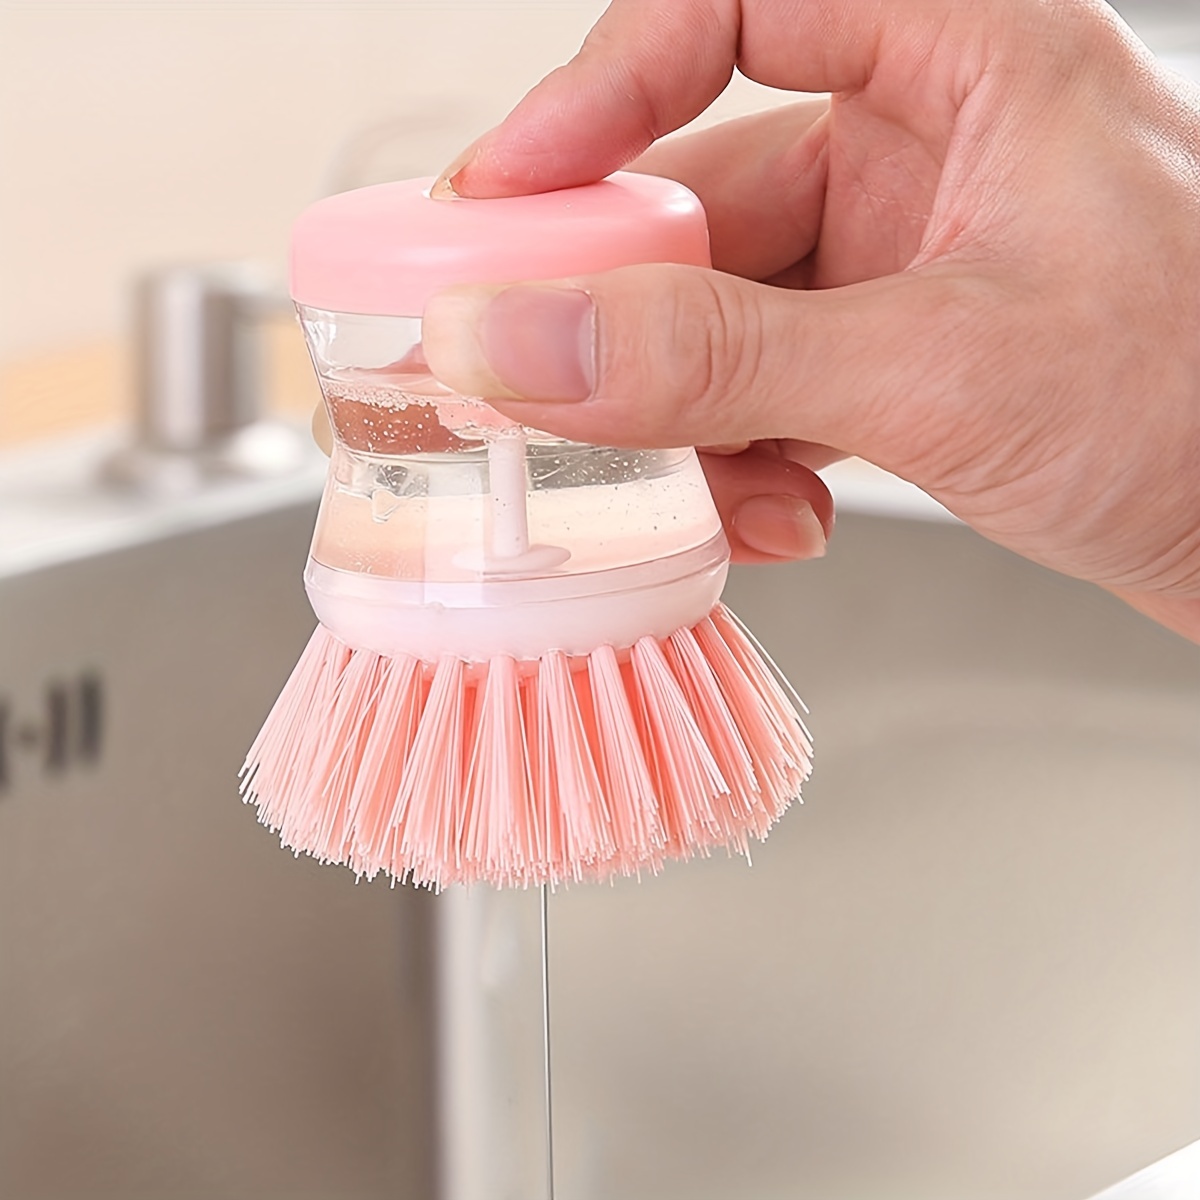 Dish Brush with Soap Dispenser. Cleaning Brush, Dish Scrubber with Soap  Dispenser for All Kitchen Dishes, Pans, Sink and Bathroom 